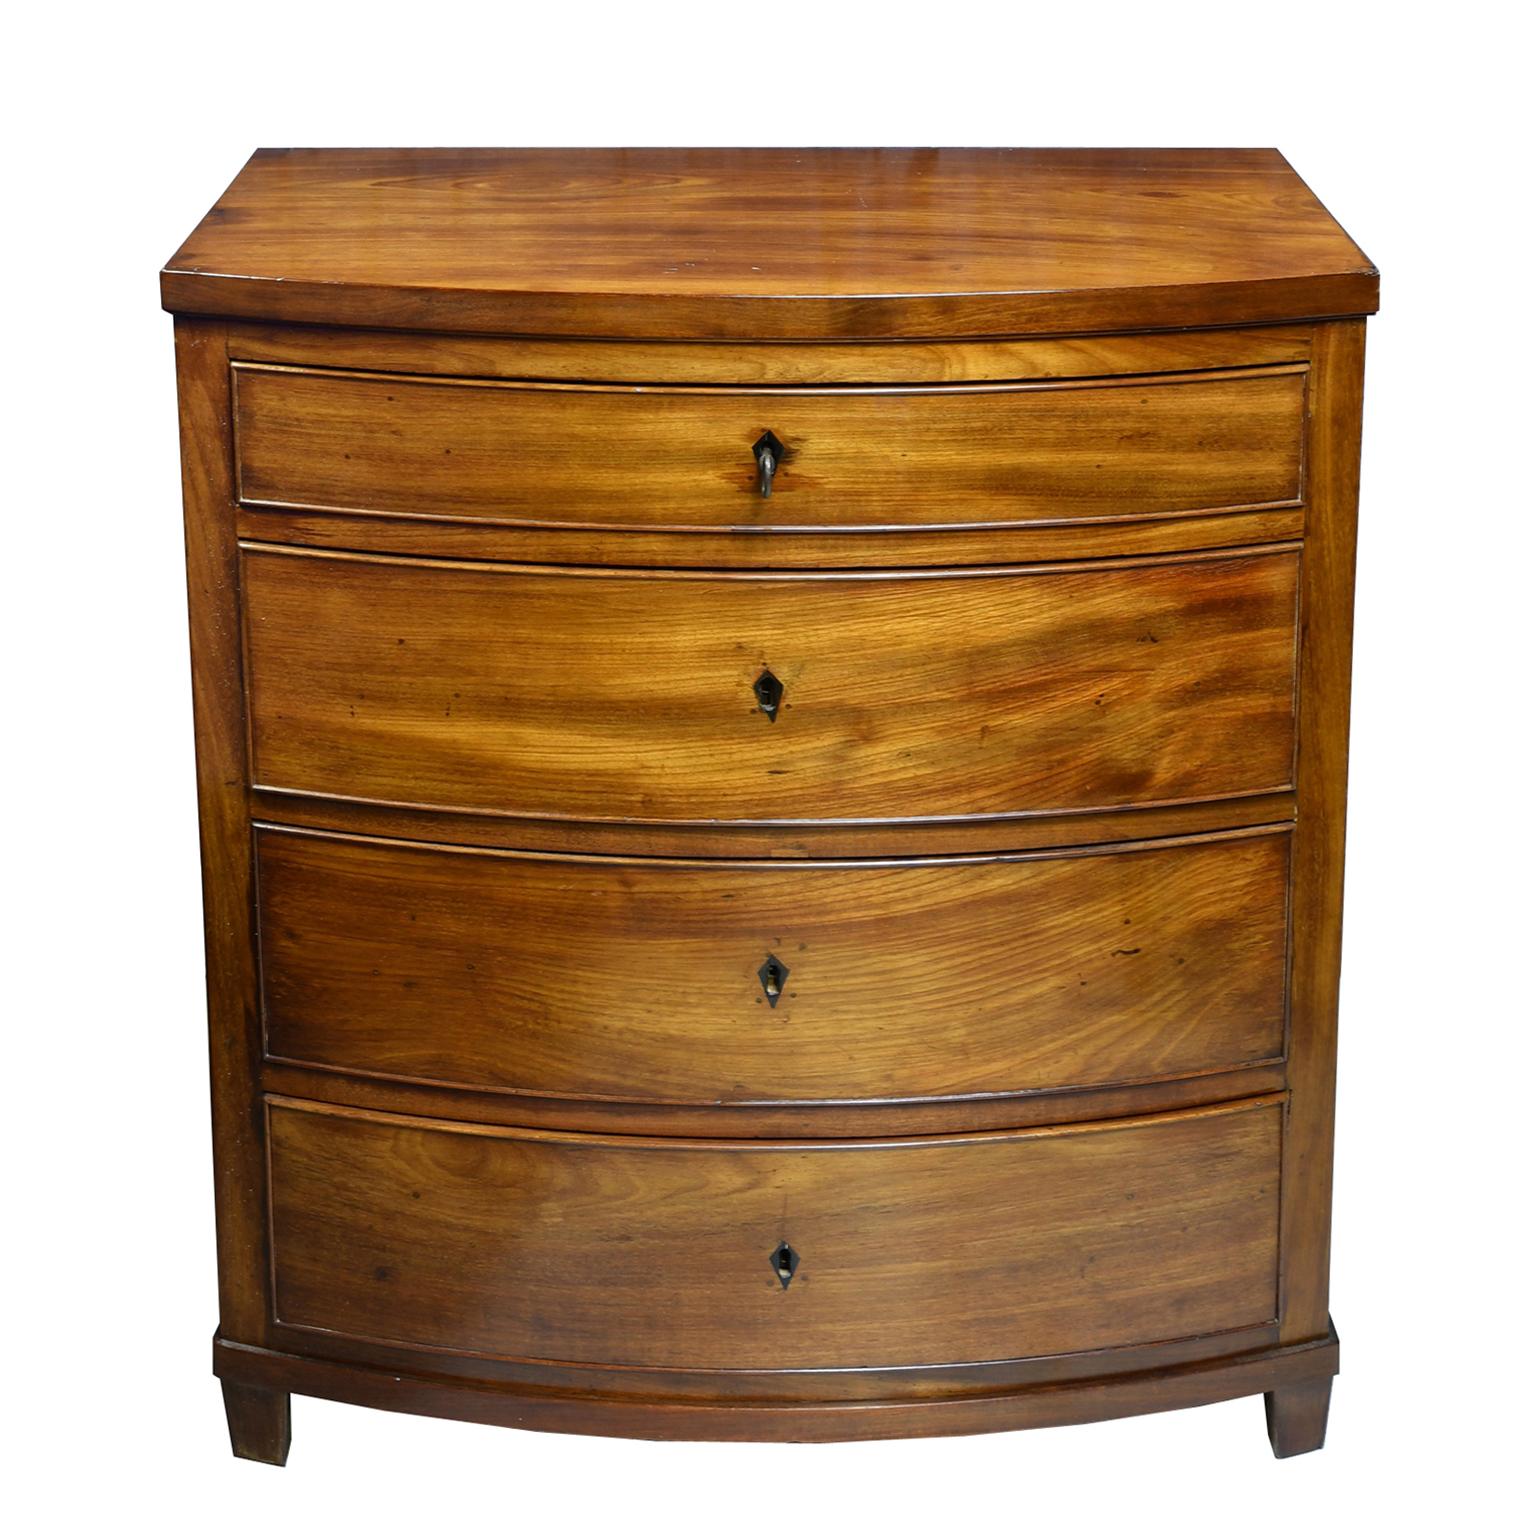 An unusually small bowed-front Empire chest in fine West Indies Mahogany with four drawers with inlaid ebony key plates. Chest rests on tapered square feet, Denmark, circa 1810. Makes a stunning hall table, end table or nightstand!

Measures: 28